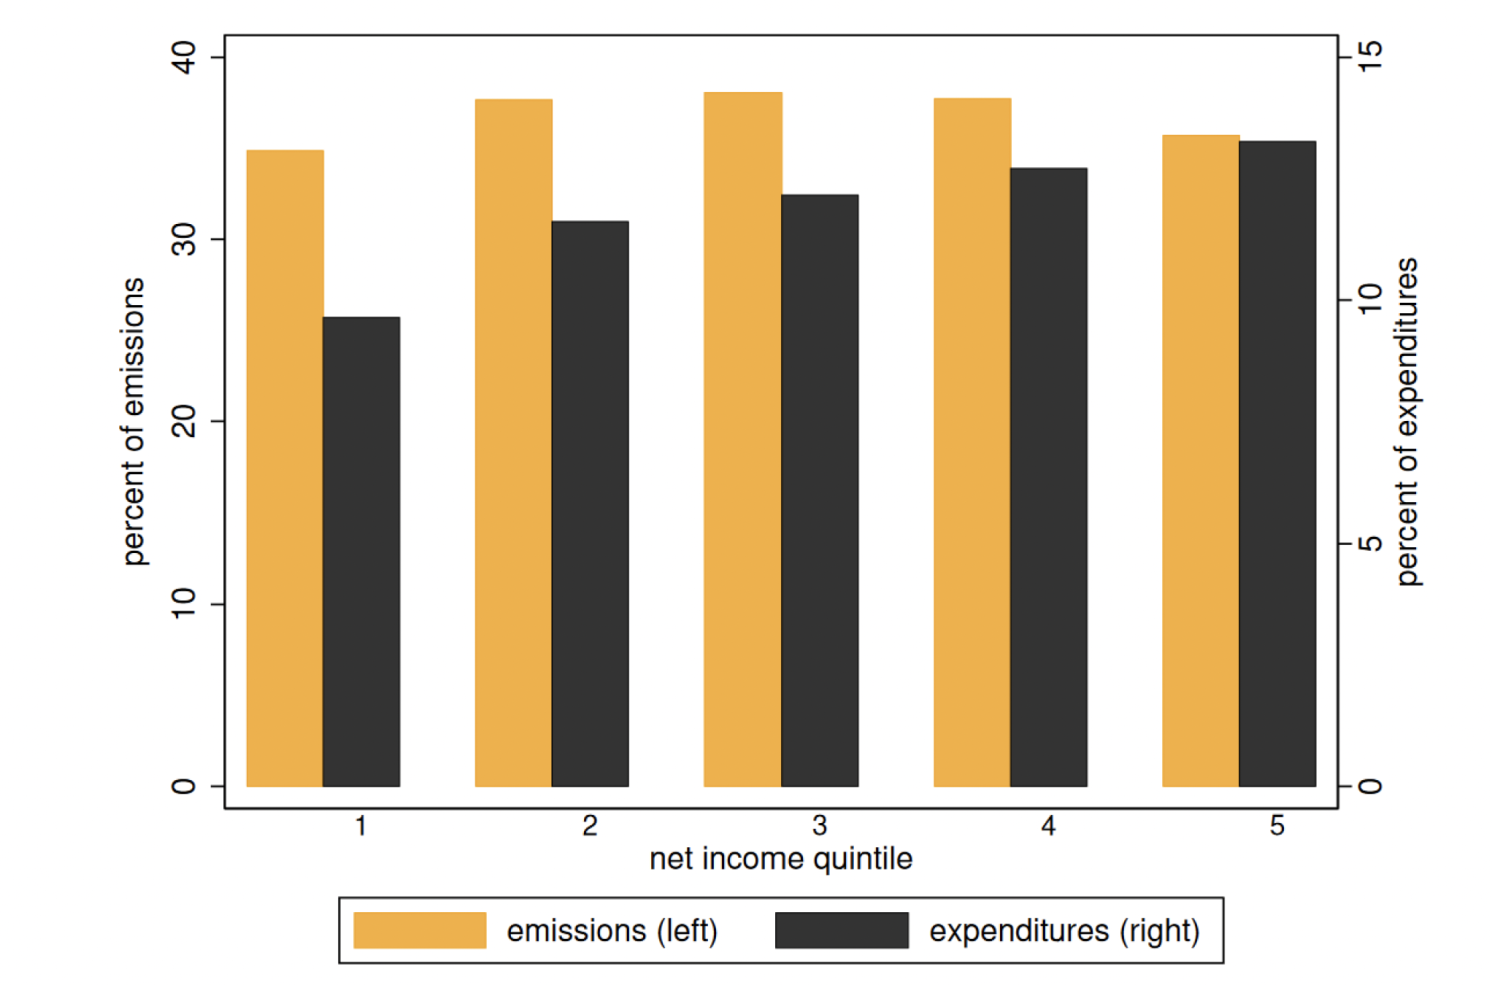 Figure 1 Commitment good carbon emissions and expenditure shares along the income distribution